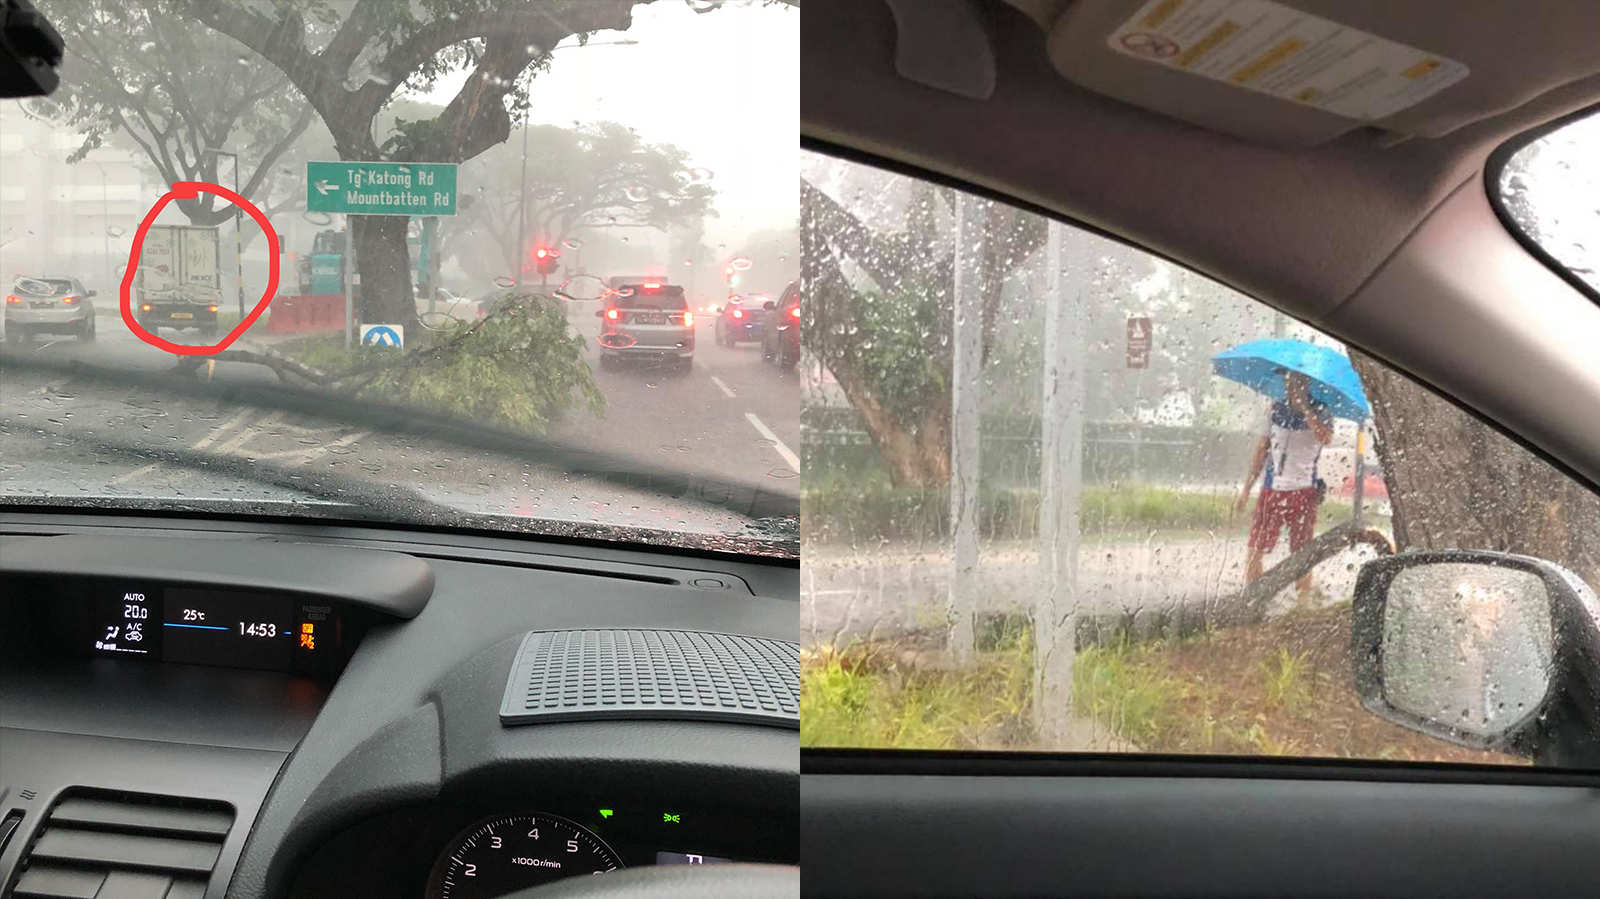 Risking his own safety, truck driver braves heavy rain to remove fallen branch from the road